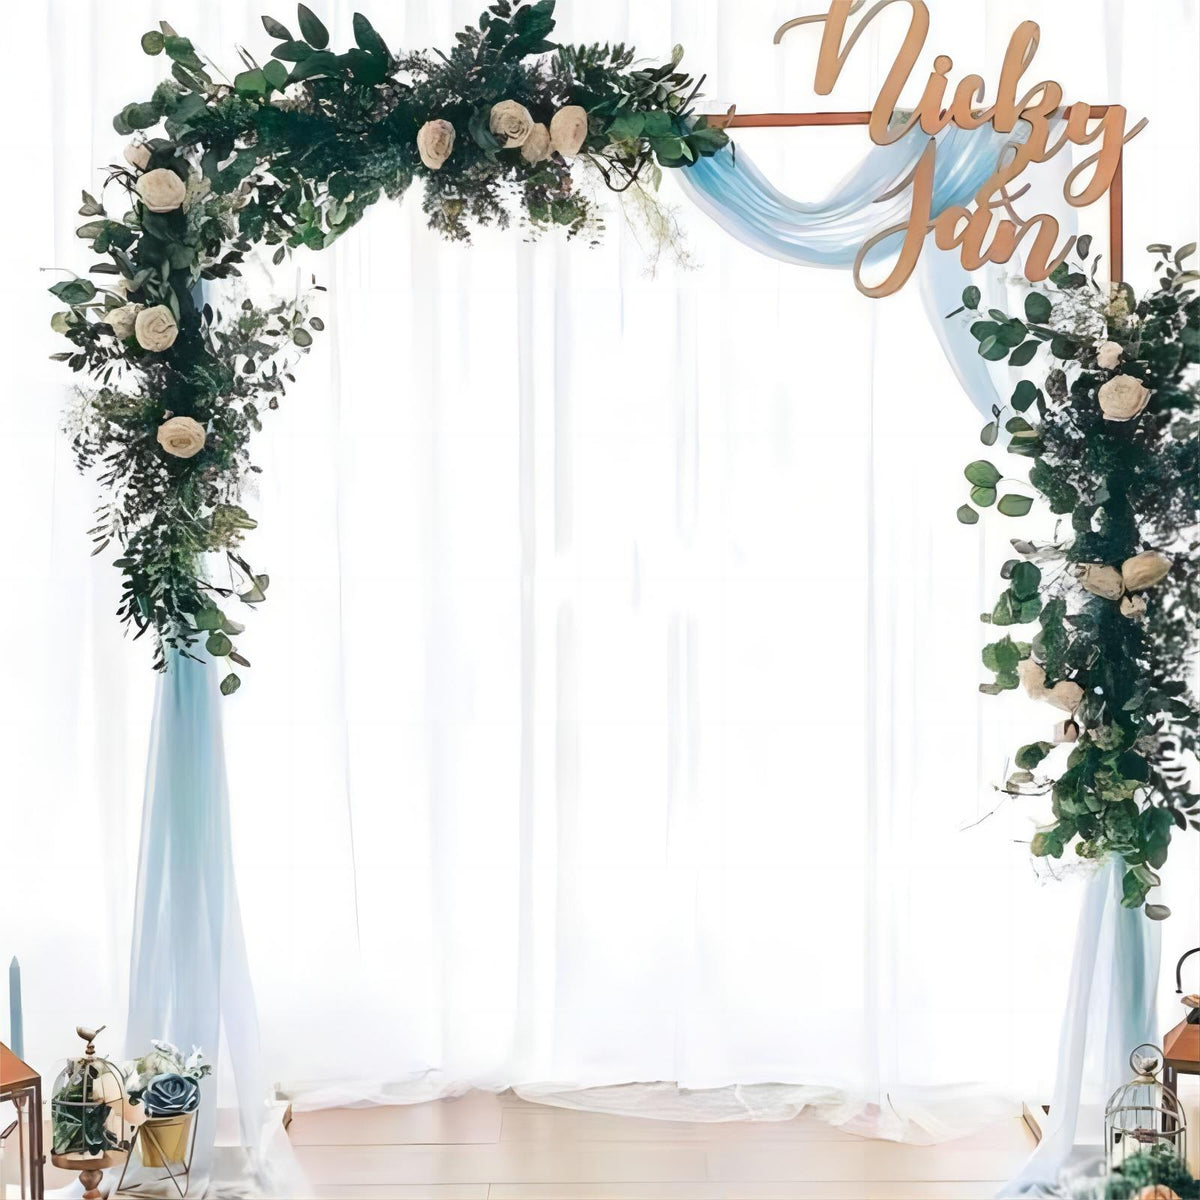 Iron Party Stand Flower Stand Wedding Arch Party Birthday Backdrop HJ9021